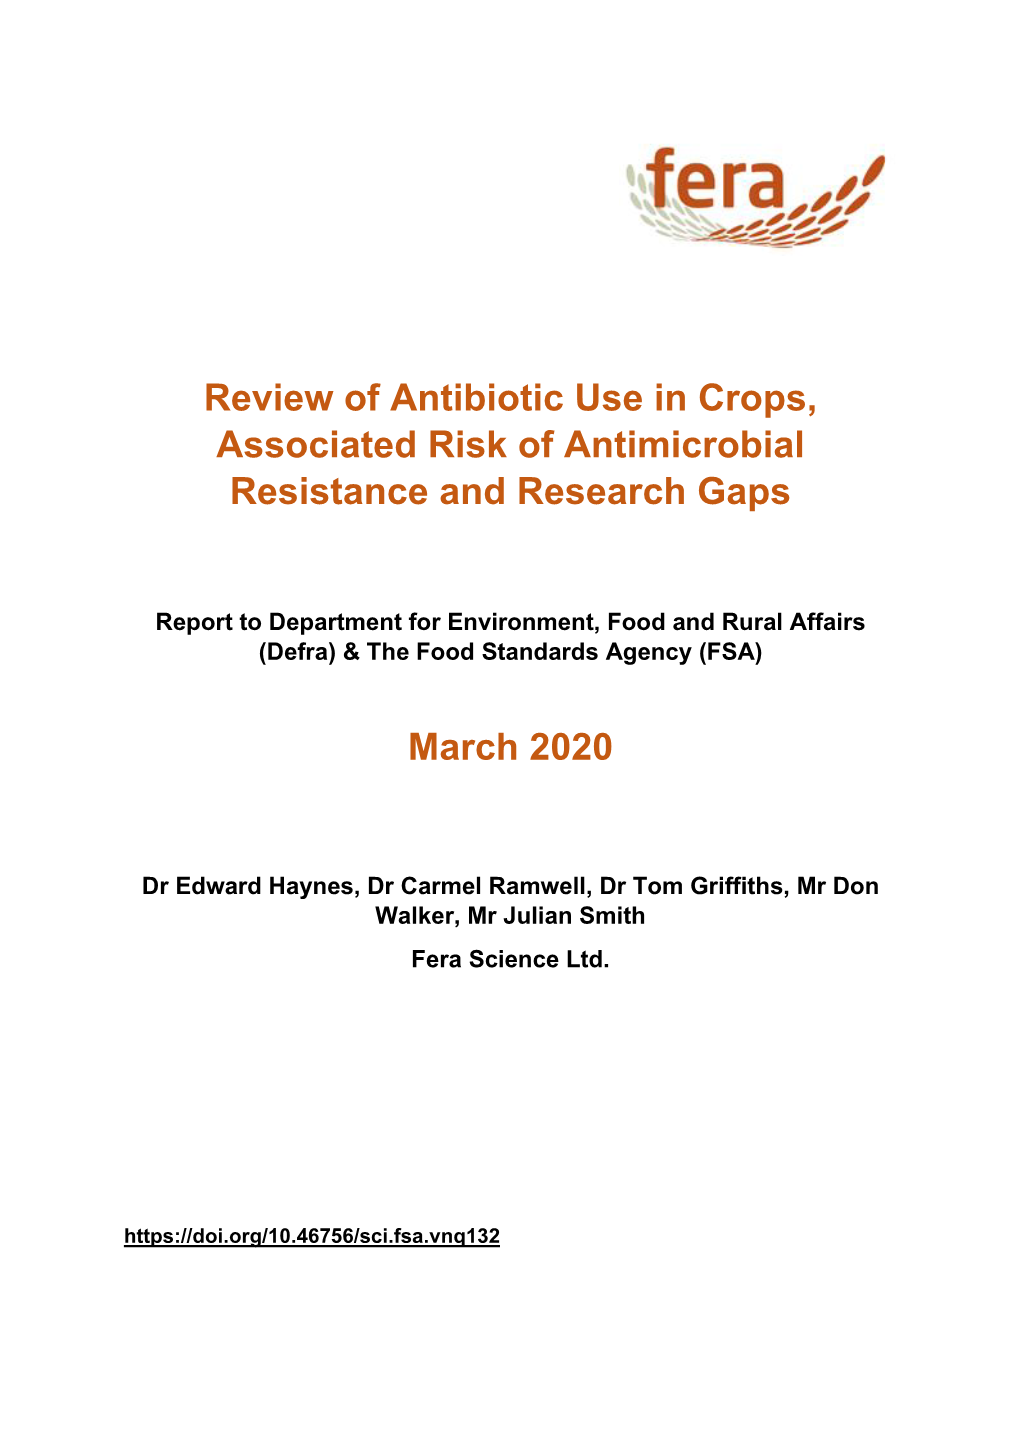 Review of Antibiotic Use in Crops, Associated Risk of Antimicrobial Resistance and Research Gaps